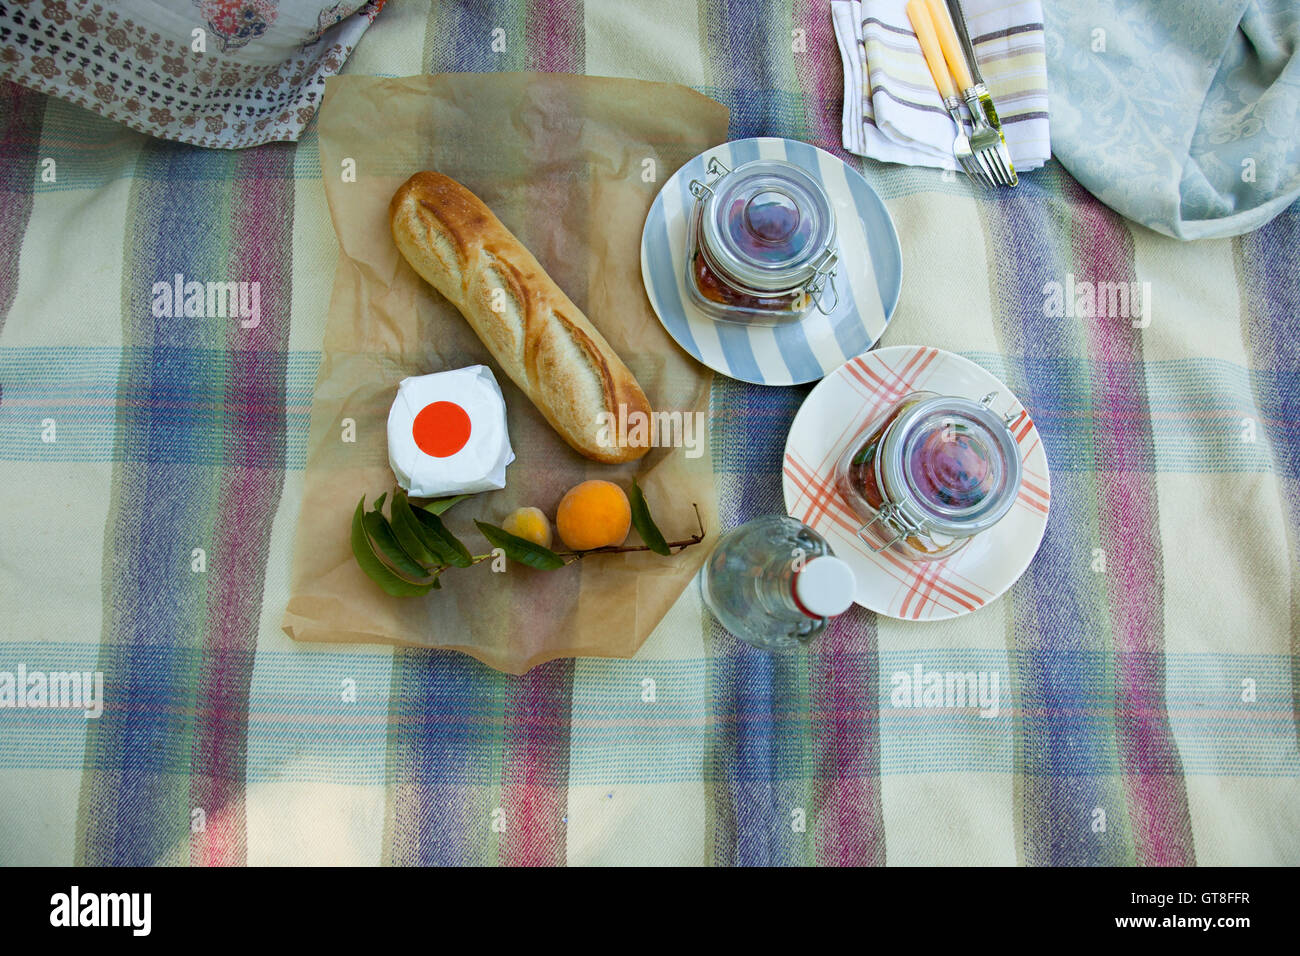 Overhead View of Picnic Spread on Blanket with Baguette, Wrapped Cheese and Fruit with Water Bottle Stock Photo